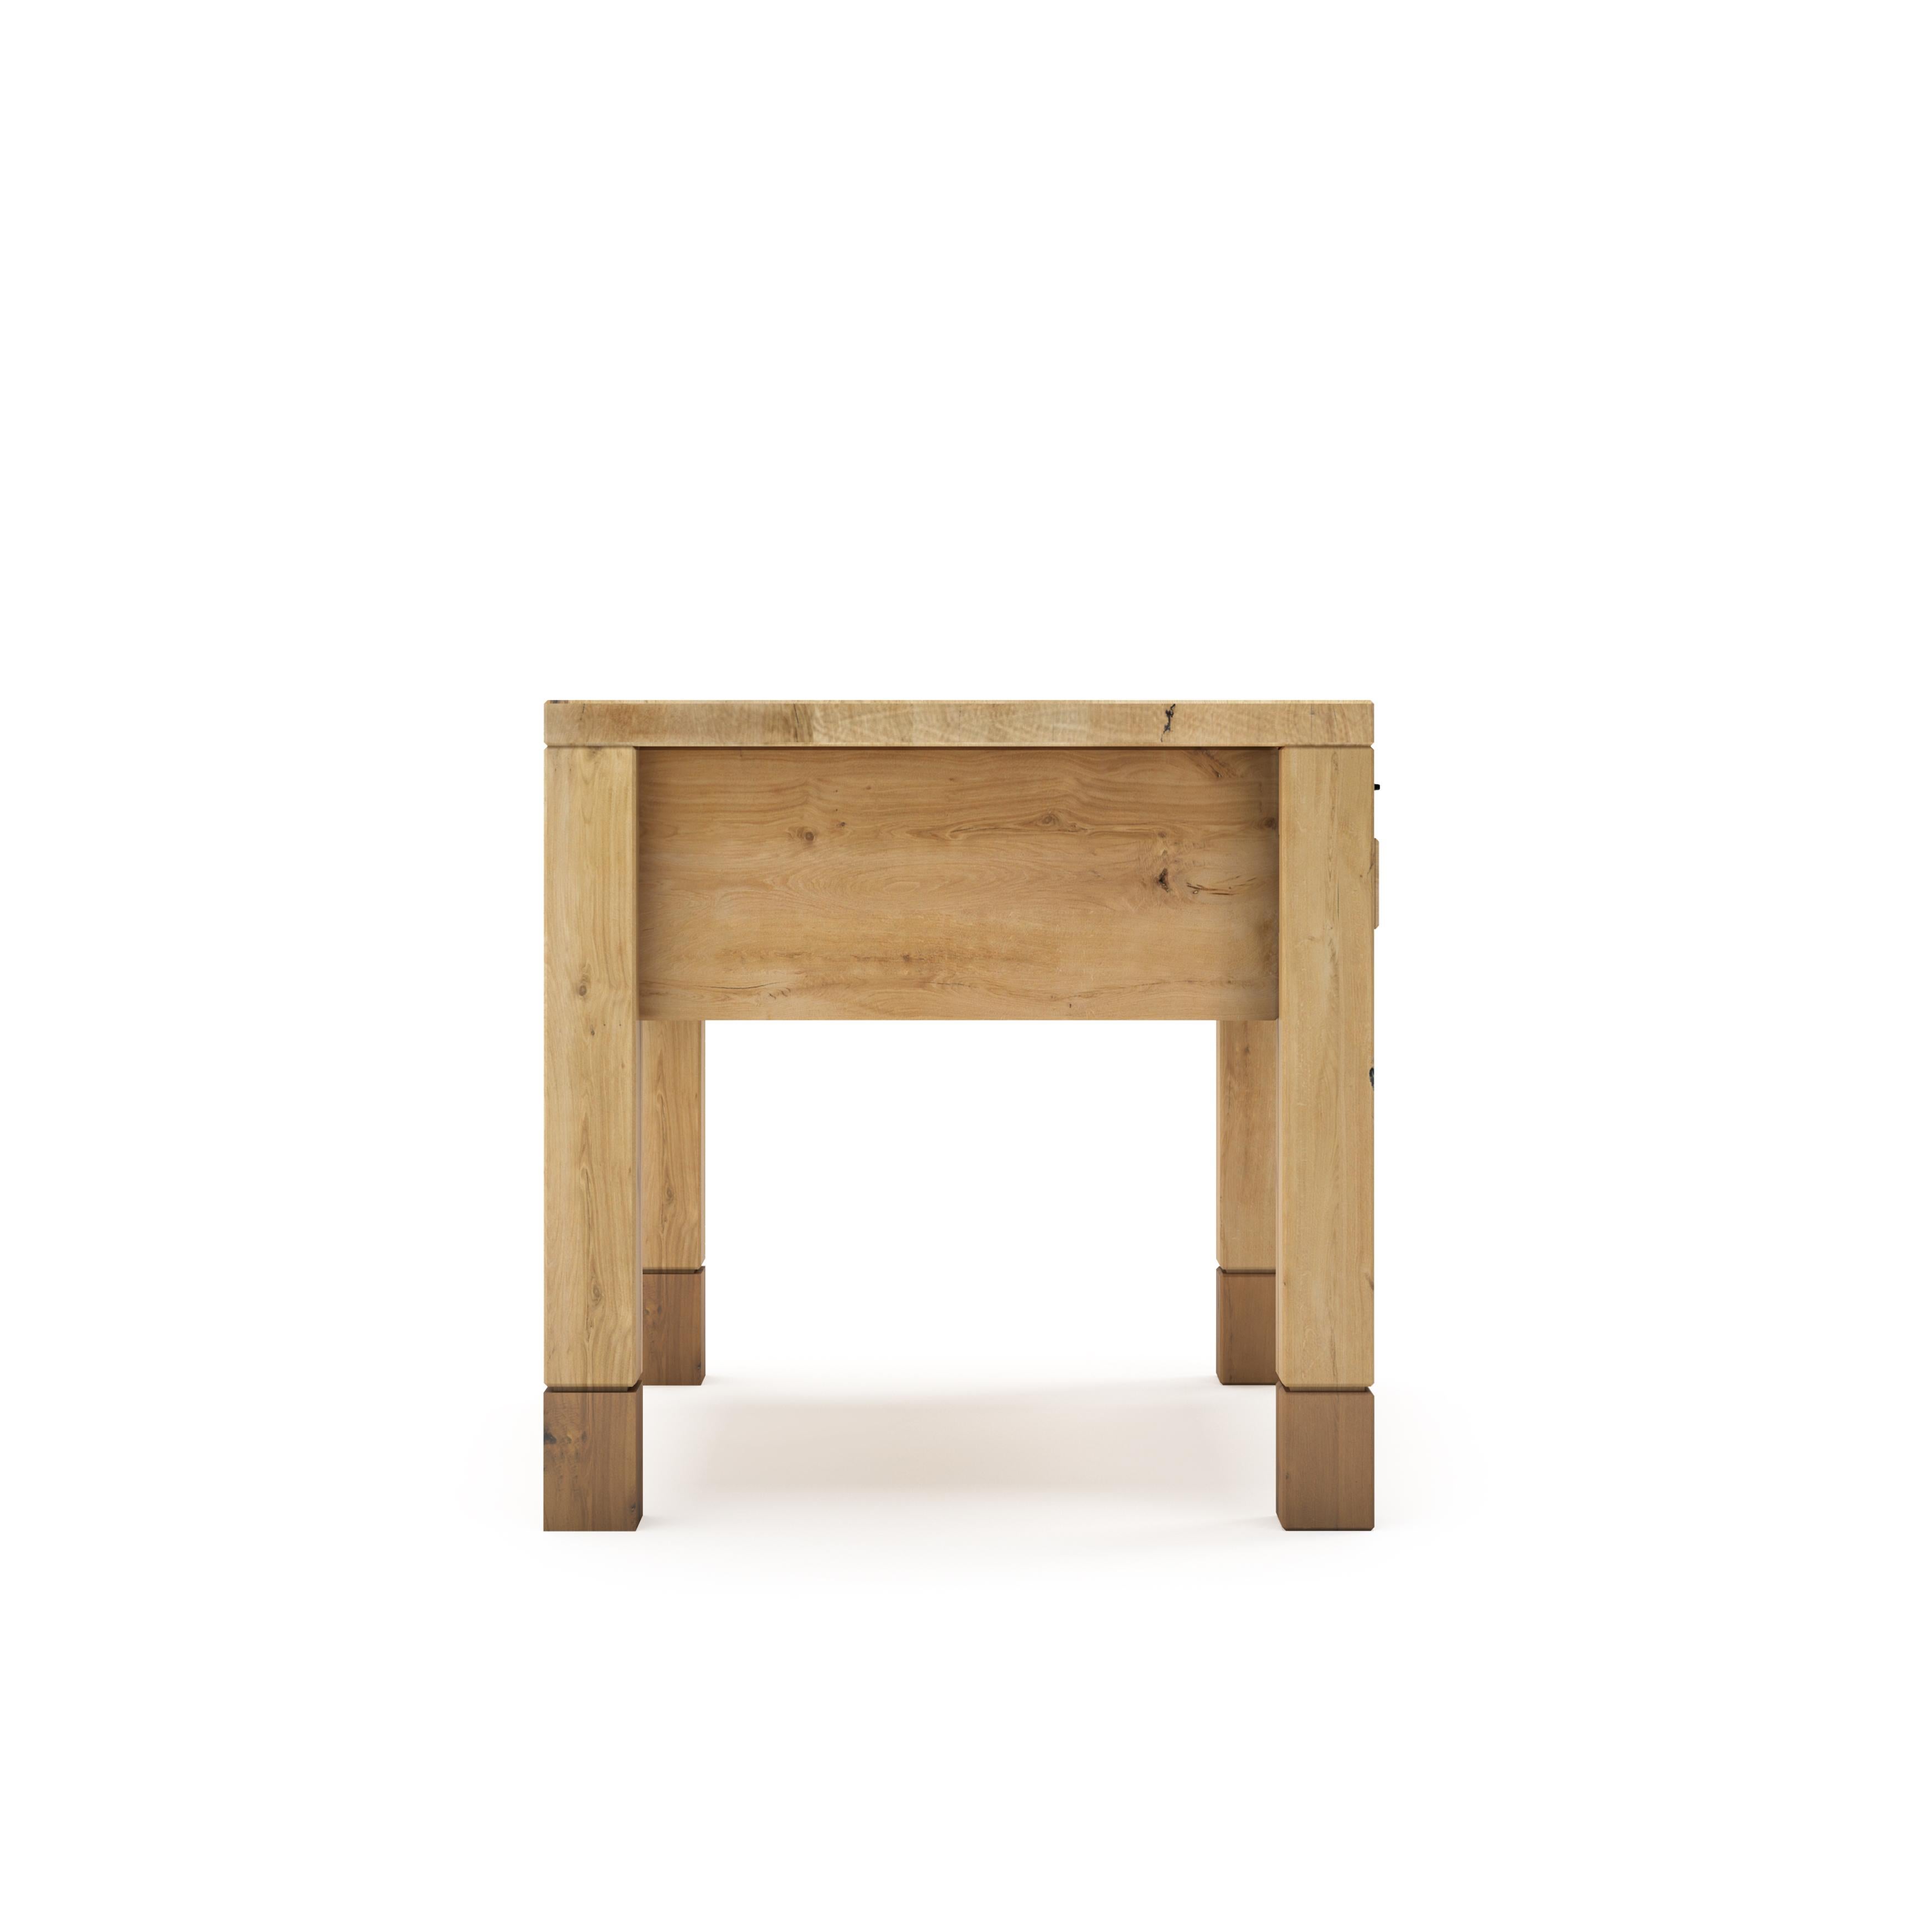 Introducing the Dala-Bed Side Table, a stylish, functional piece for any bedroom. This beautiful table features a drawer for storage and a design that adds a touch of beauty to your bedroom

All Tektōn pieces are made of natural massive wood.
Small